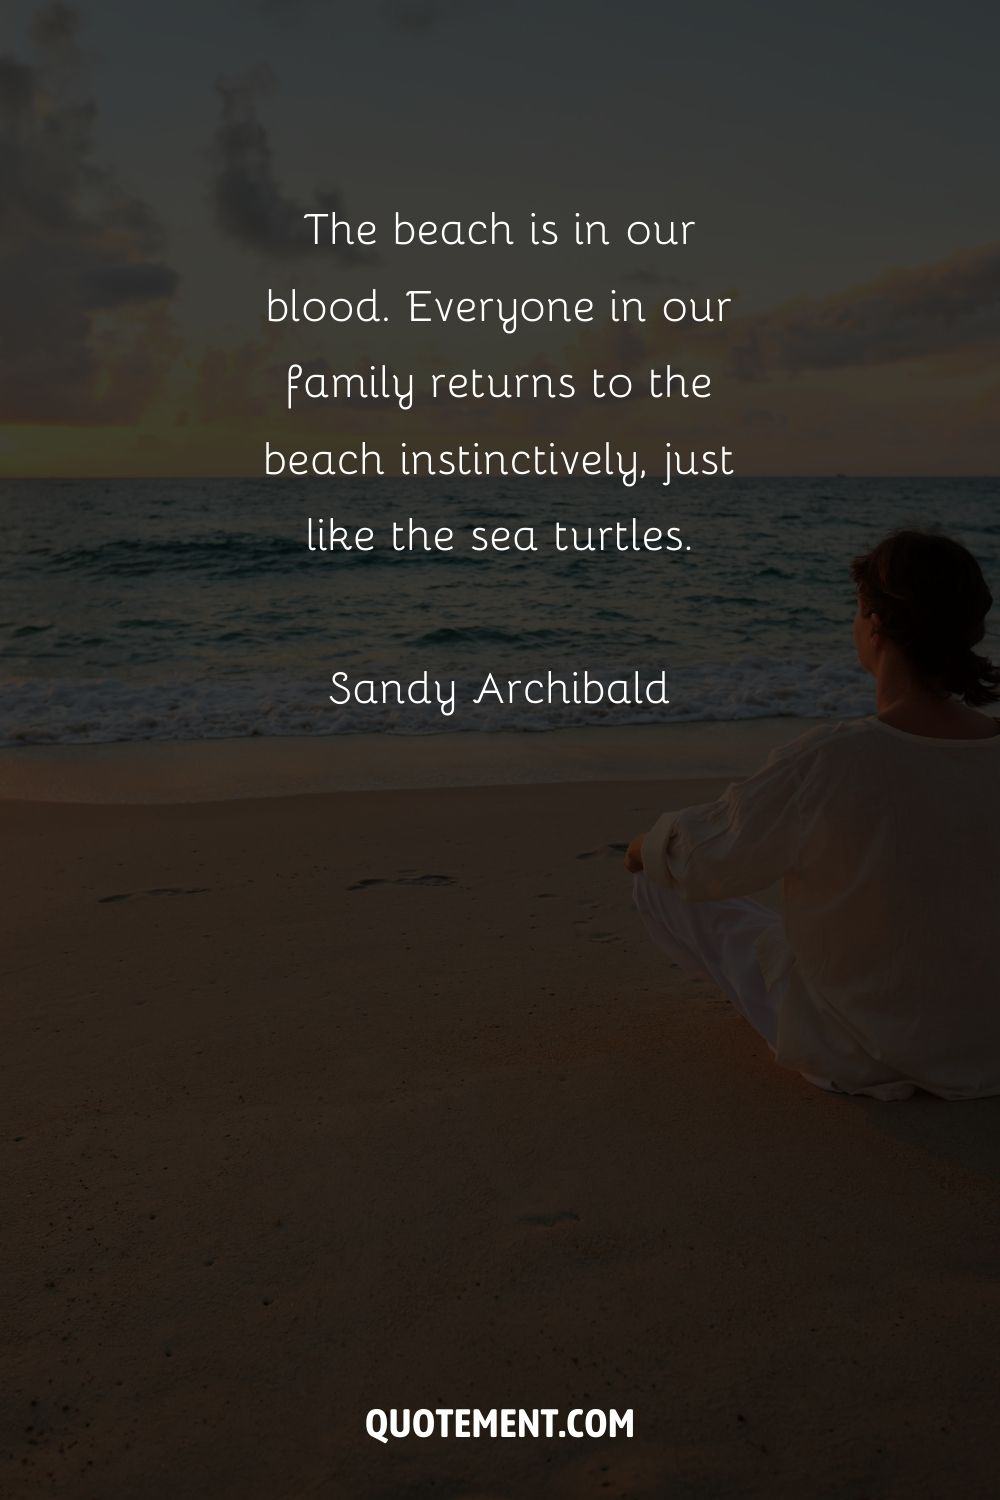 The beach is in our blood. Everyone in our family returns to the beach instinctively, just like the sea turtles. – Sandy Archibald